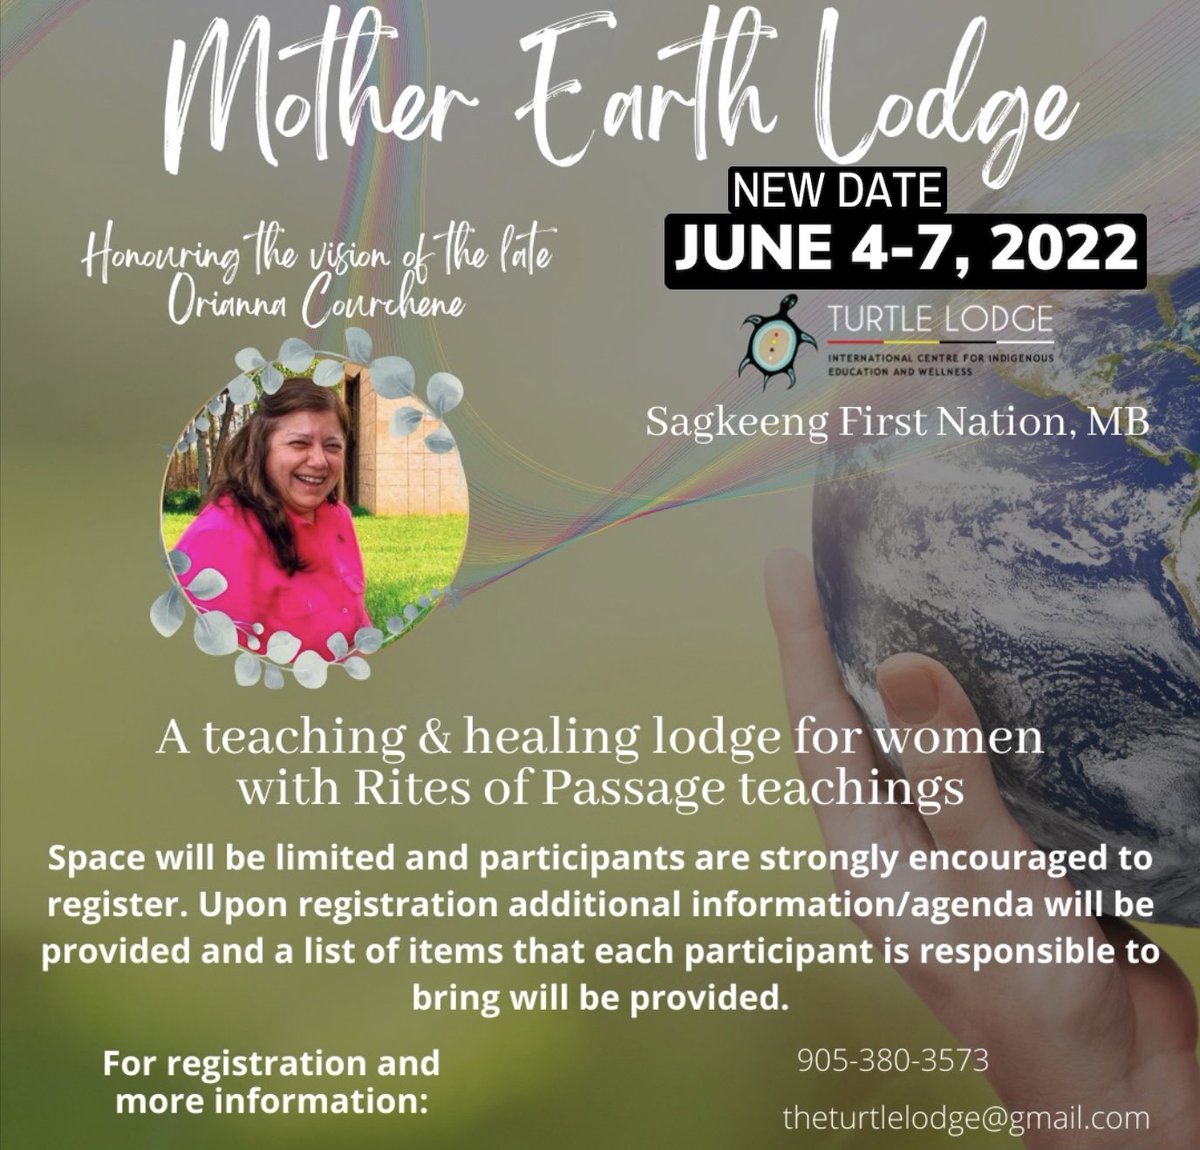 Mother Earth Lodge New Date: June 4-7, 2022 at Turtle Lodge Honouring the vision of the late Orianna Courchene A teaching and healing lodge for Women with Rites of Passage teachings. For registration and more information email theturtlelodge@gmail.com